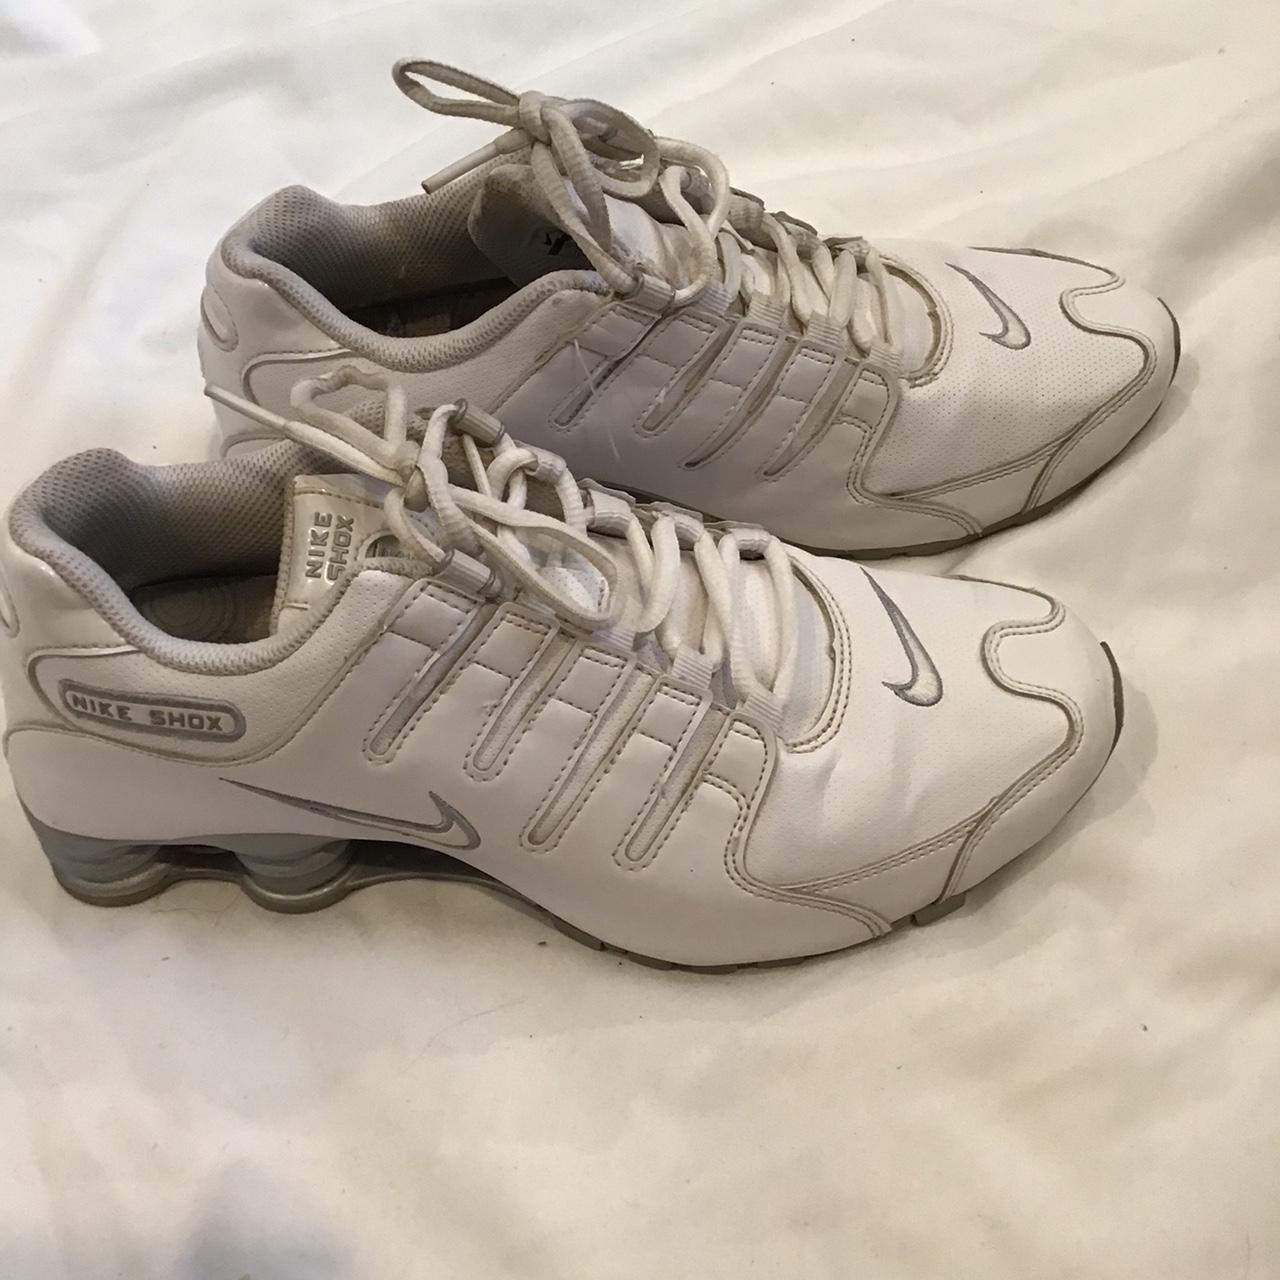 Product Image 3 - Pre-Owned: Nike Shox size 9.5